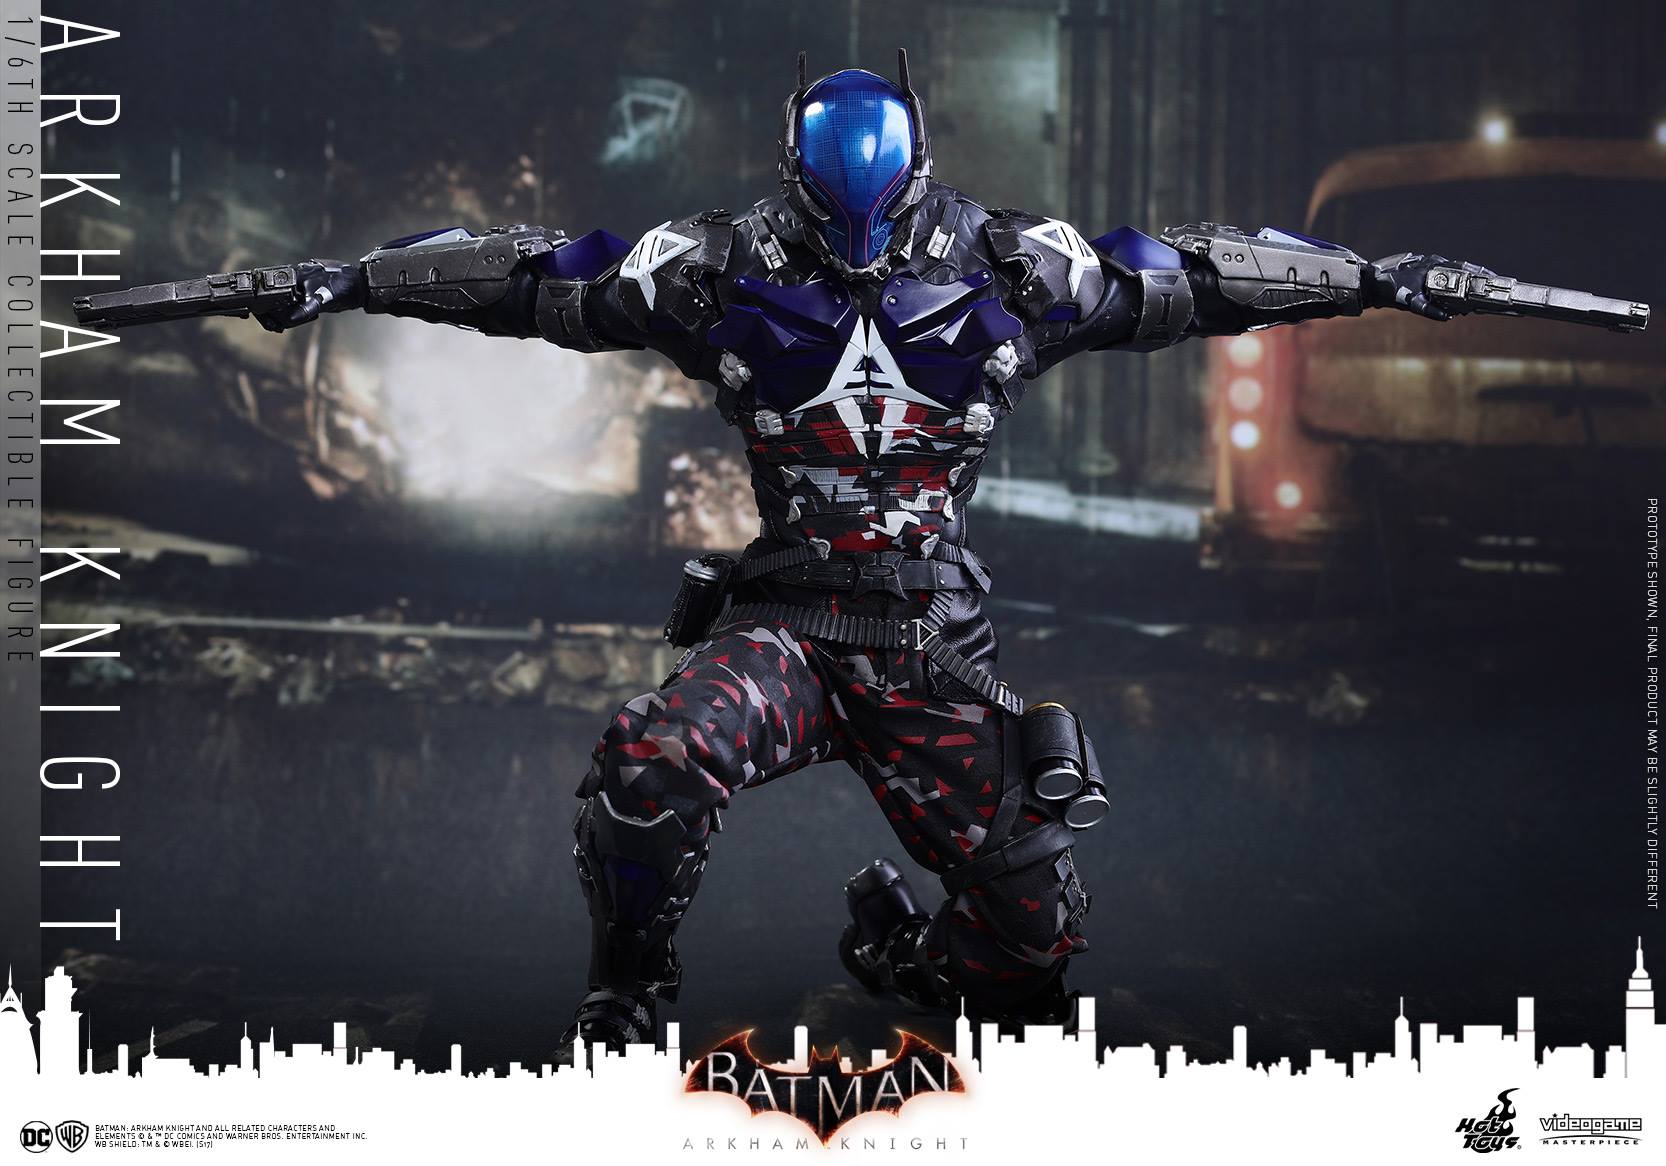 Batman Arkham Knight Sixth Scale Figure by Hot Toys | ActionFiguresDaily.com1666 x 1166